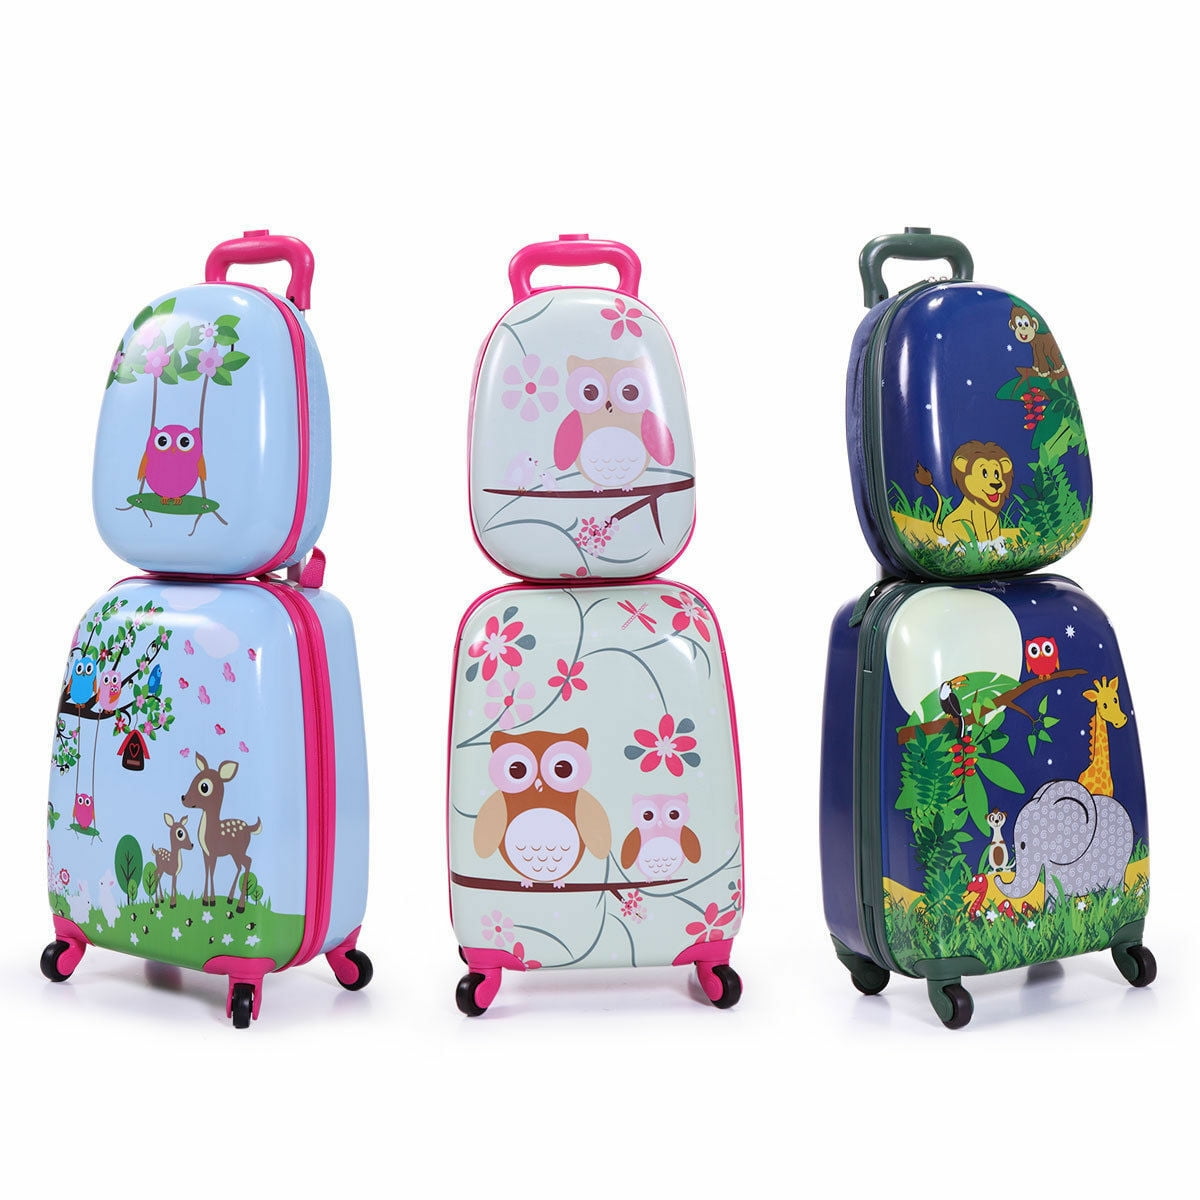 2Pcs Kids Luggage Trolley Hard Shell Suitcase for Boys and Girls Travel Suitcases 12 16 Kids Carry On Luggage Set 